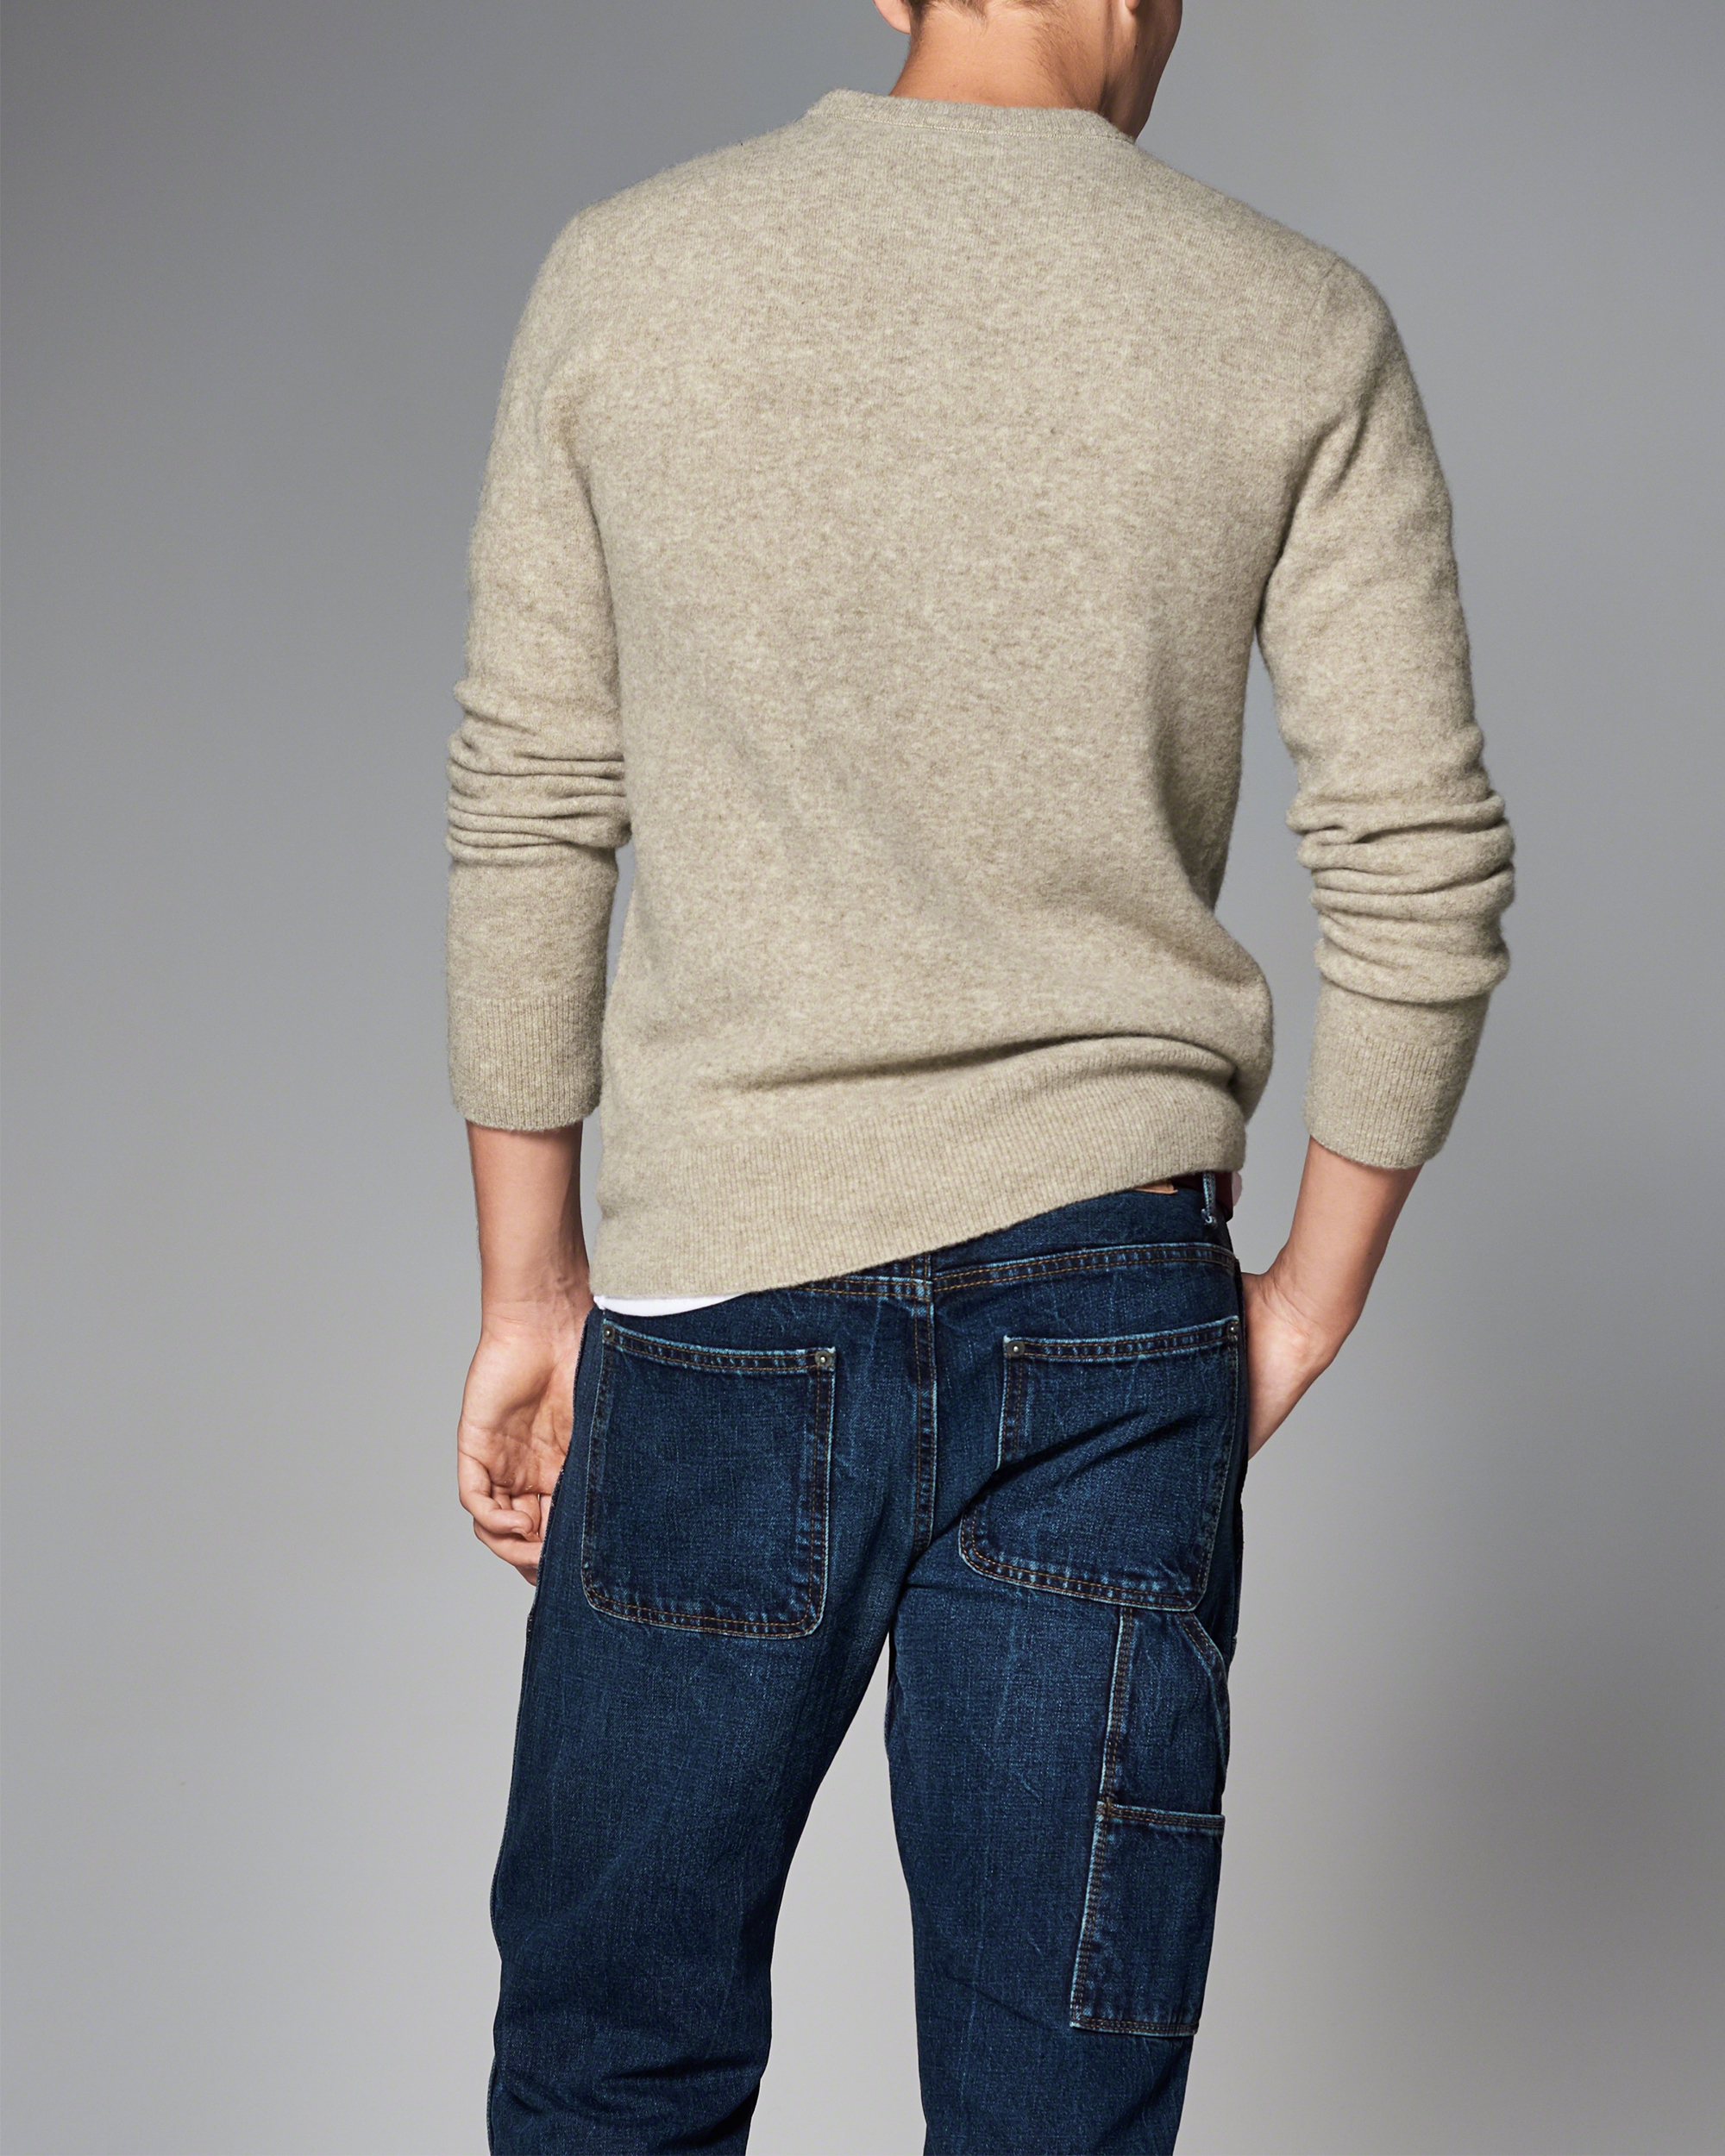 Lyst - Abercrombie & Fitch Wool-blend Henley Sweater in Natural for Men